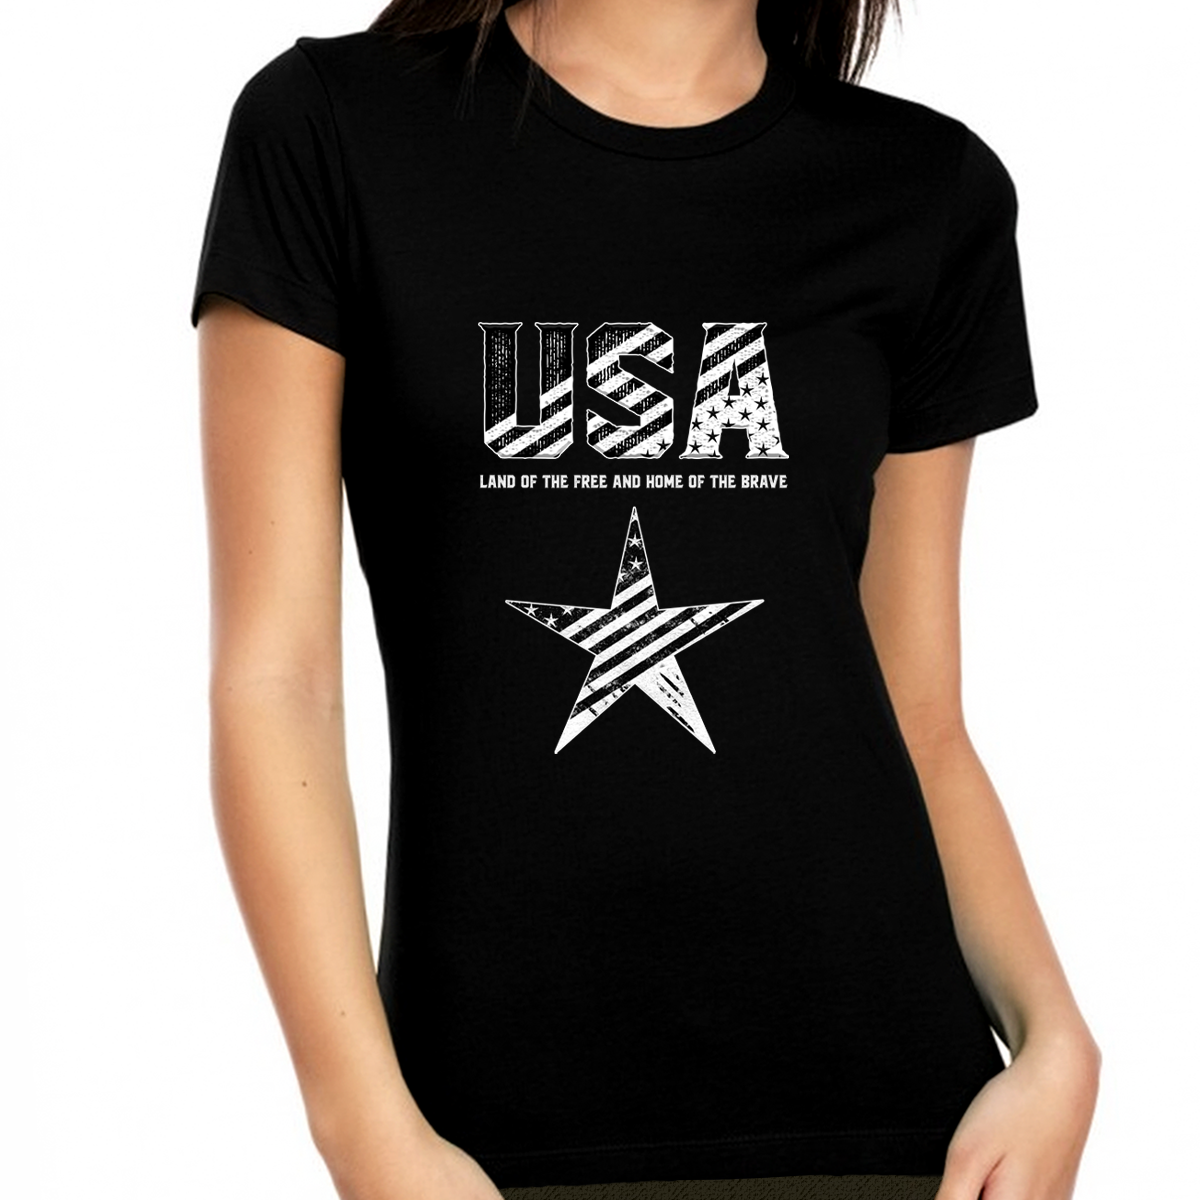 4th of July Shirts for Women - American Flag Shirt Women - 4th of July Shirts - America Shirt - Fire Fit Designs